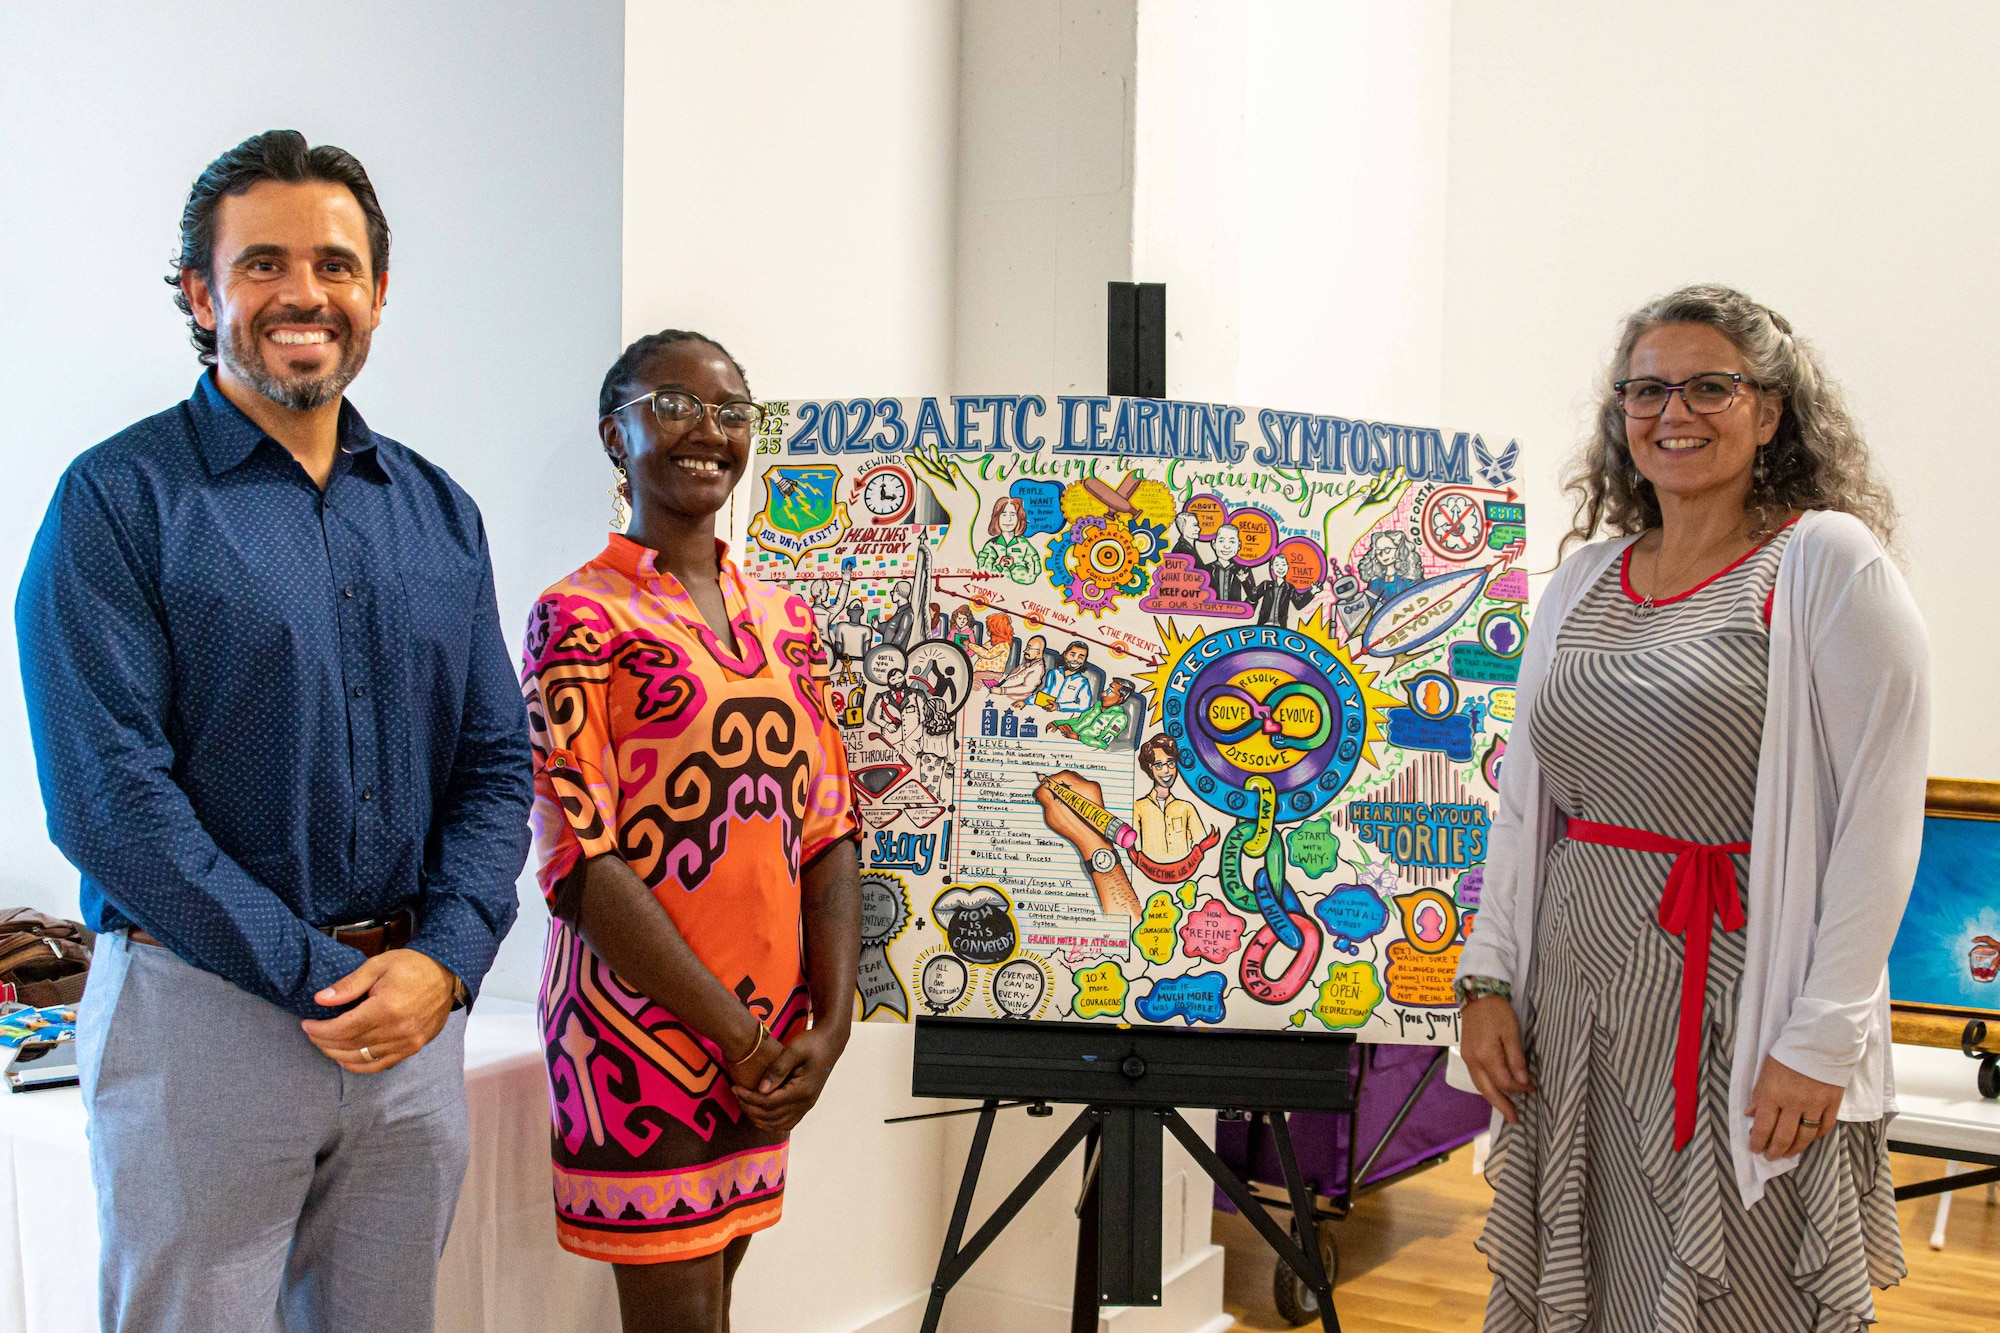 Graphic illustrator Tiiwon Siaway (center) displays her work at the Air Education and Training Command Learning Symposium, Aug. 24, 2023. Standing with Siaway are Marcus Carrion (left), AETC symposium facilitator and co-chair, and Dr. Wendy Walsh (right), AETC chief learning officer. The symposium was held Aug. 22-24 at Air University, Maxwell Air Force Base, Ala., with the last day being held at the Kress building in downtown Montgomery, Ala. The symposium provided the more than 60 learning professionals from across the Department of the Air Force a ‘sharing space’ to learn from and hear about each other’s stories and successes, with the goal of transforming the way Airmen and Guardians learn. Several graphic illustrators at the symposium helped capture the dialogue amongst attendees as another medium to tell their stories. (U.S. Air Force photos by Sean Ross)